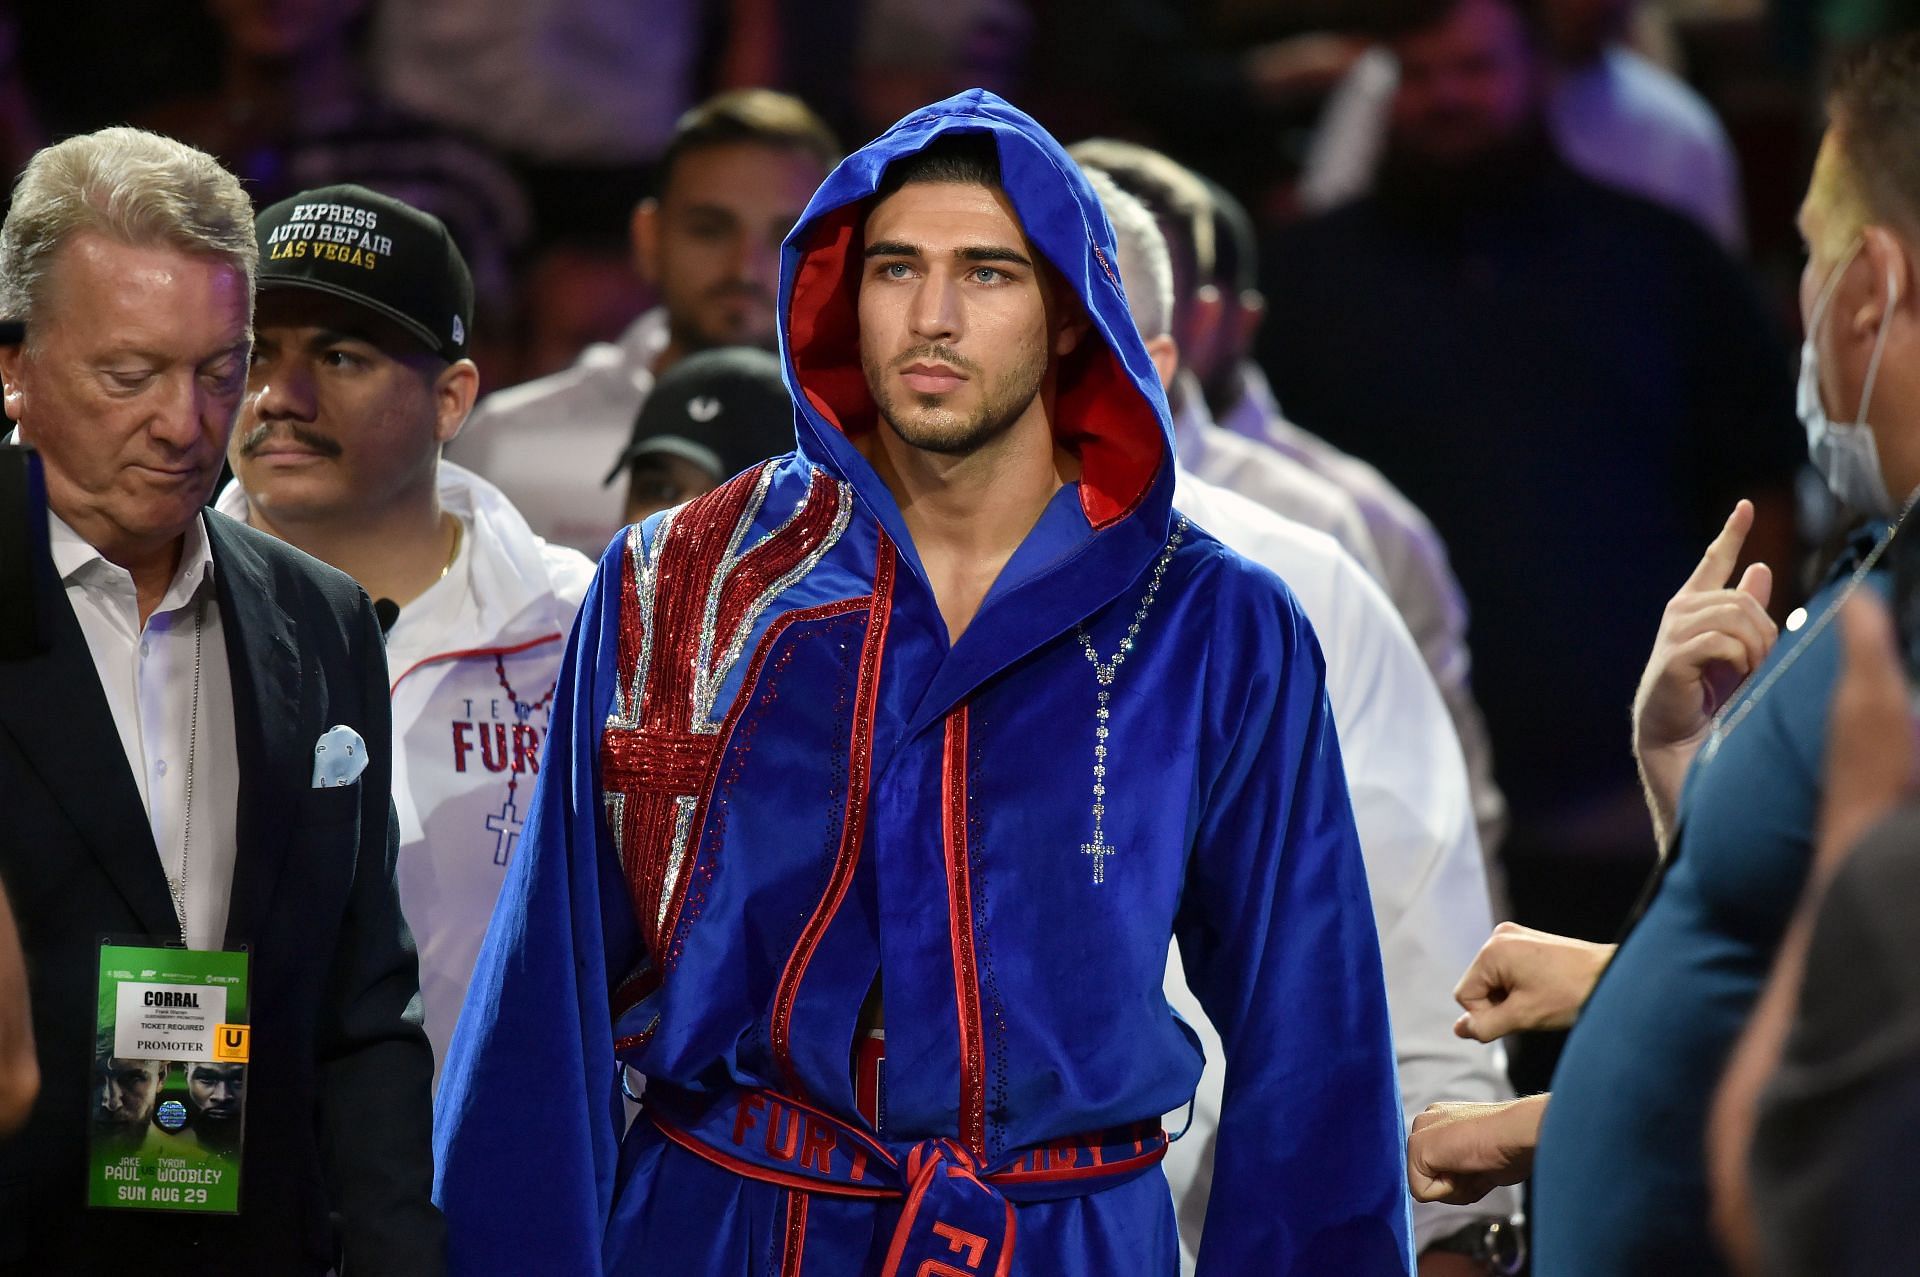 Tommy Fury wearing a robe with the flag of Great Britain as he entered the ring to face Anthony Taylor.